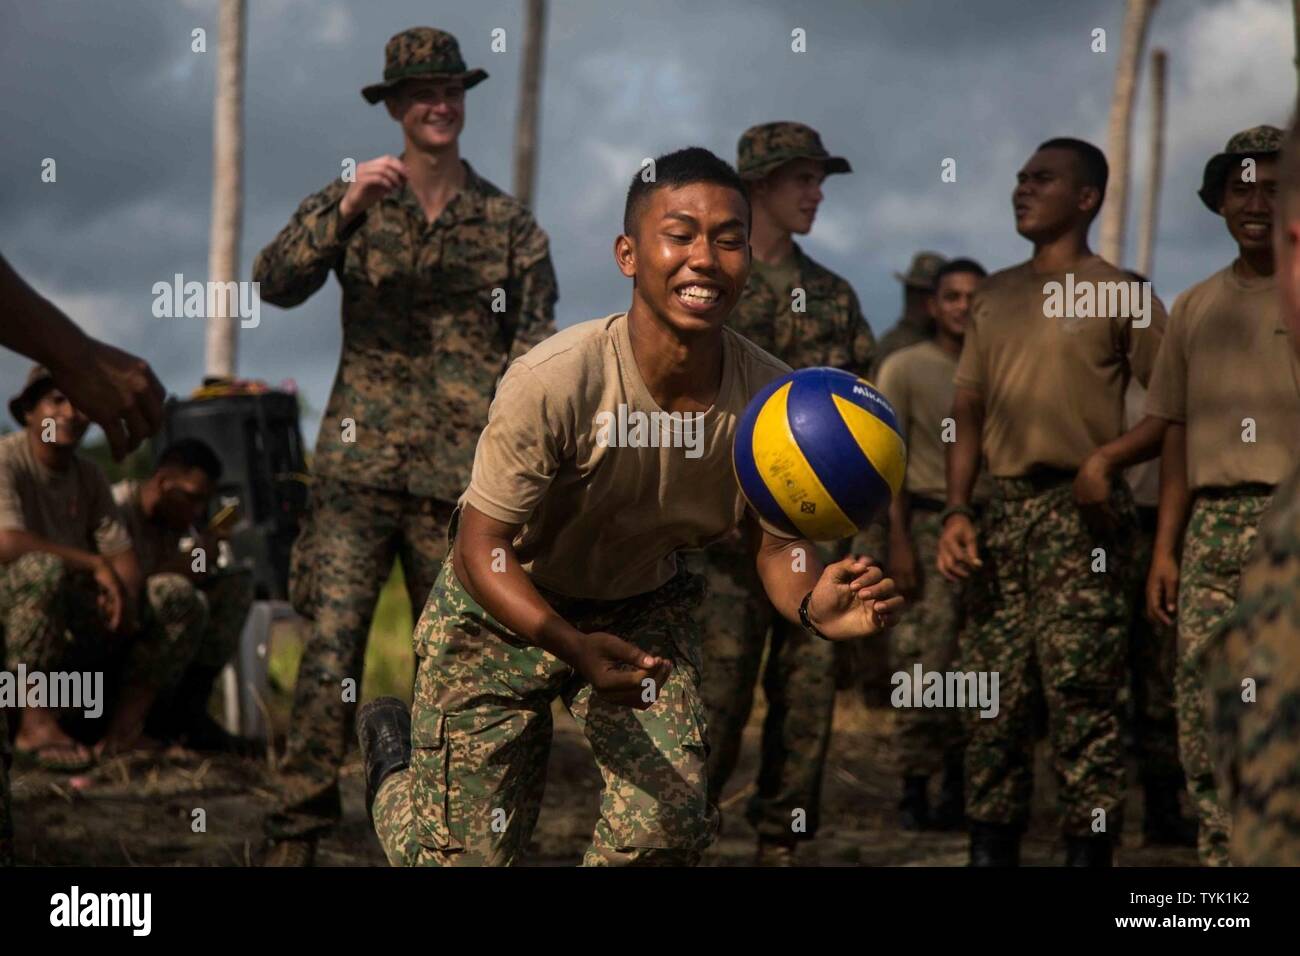 SABAH PROVINCE, Malaysia (November 12, 2016) A soldier with 7th Battalion, Royal Malay Regiment, prepares to serve during a volleyball game held alongside Marines with the 11th Marine Expeditionary Unit during Exercise Tiger Strike 2016, in Sabah Province, Malaysia, November 11, 2016. TS16 provided the U.S. and Malaysian service members the opportunity to strengthen military-to-military ties through joint training and troop-to-troop interactions. Stock Photo